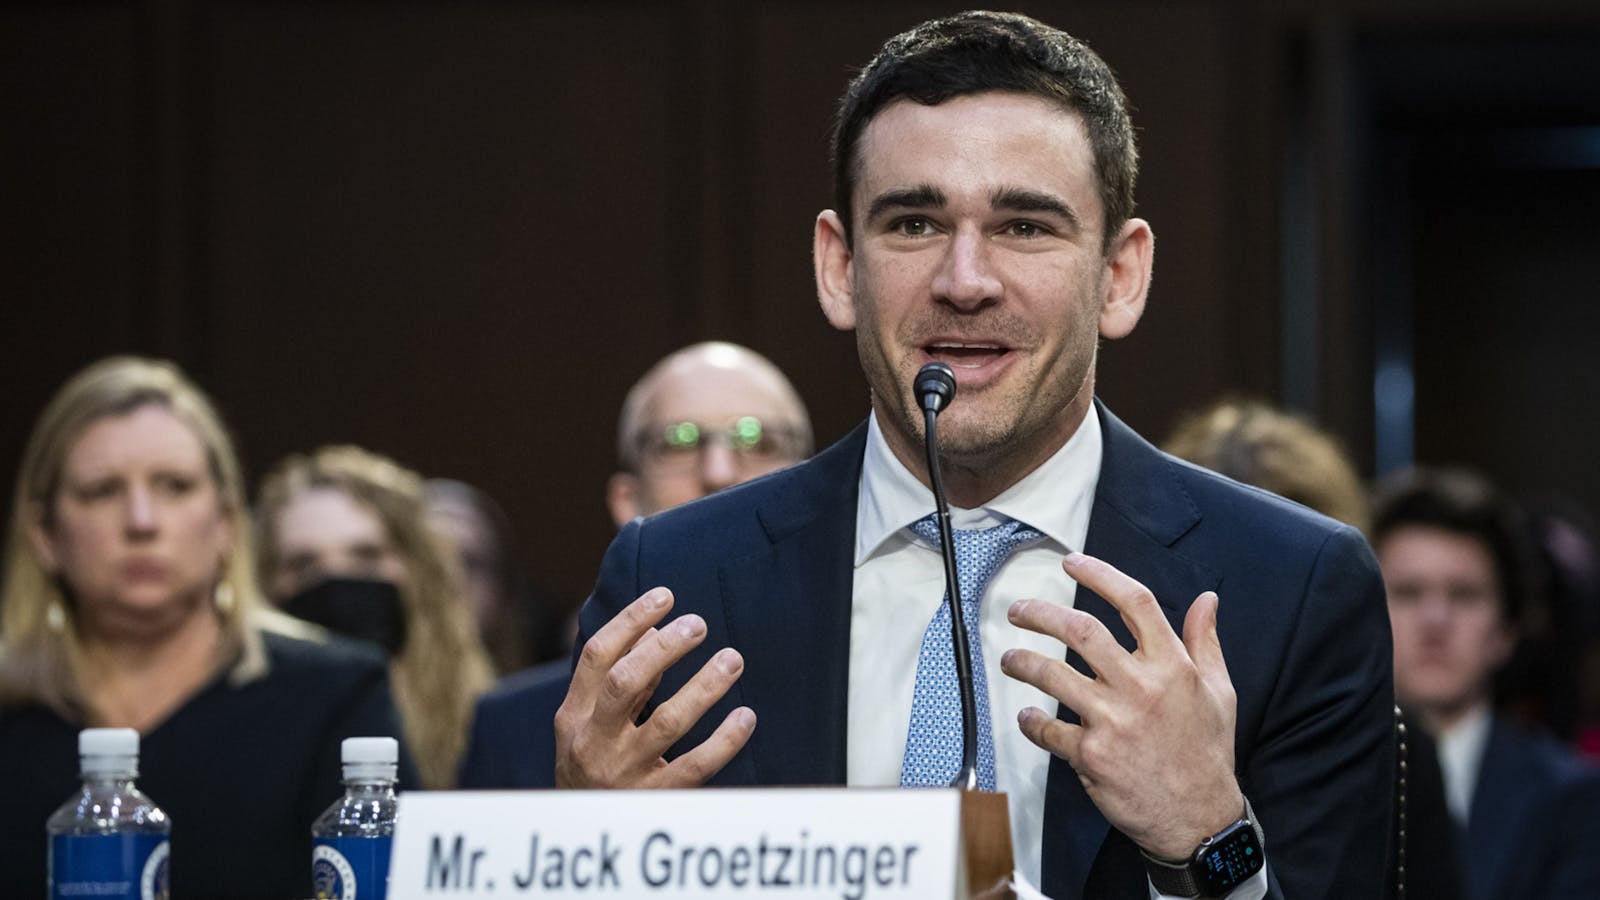 SeatGeek CEO Jack Groetzinger speaks to Senators during a hearing that revolved around rival Ticketmaster's competitive practices earlier this year. Photo by Bloomberg.